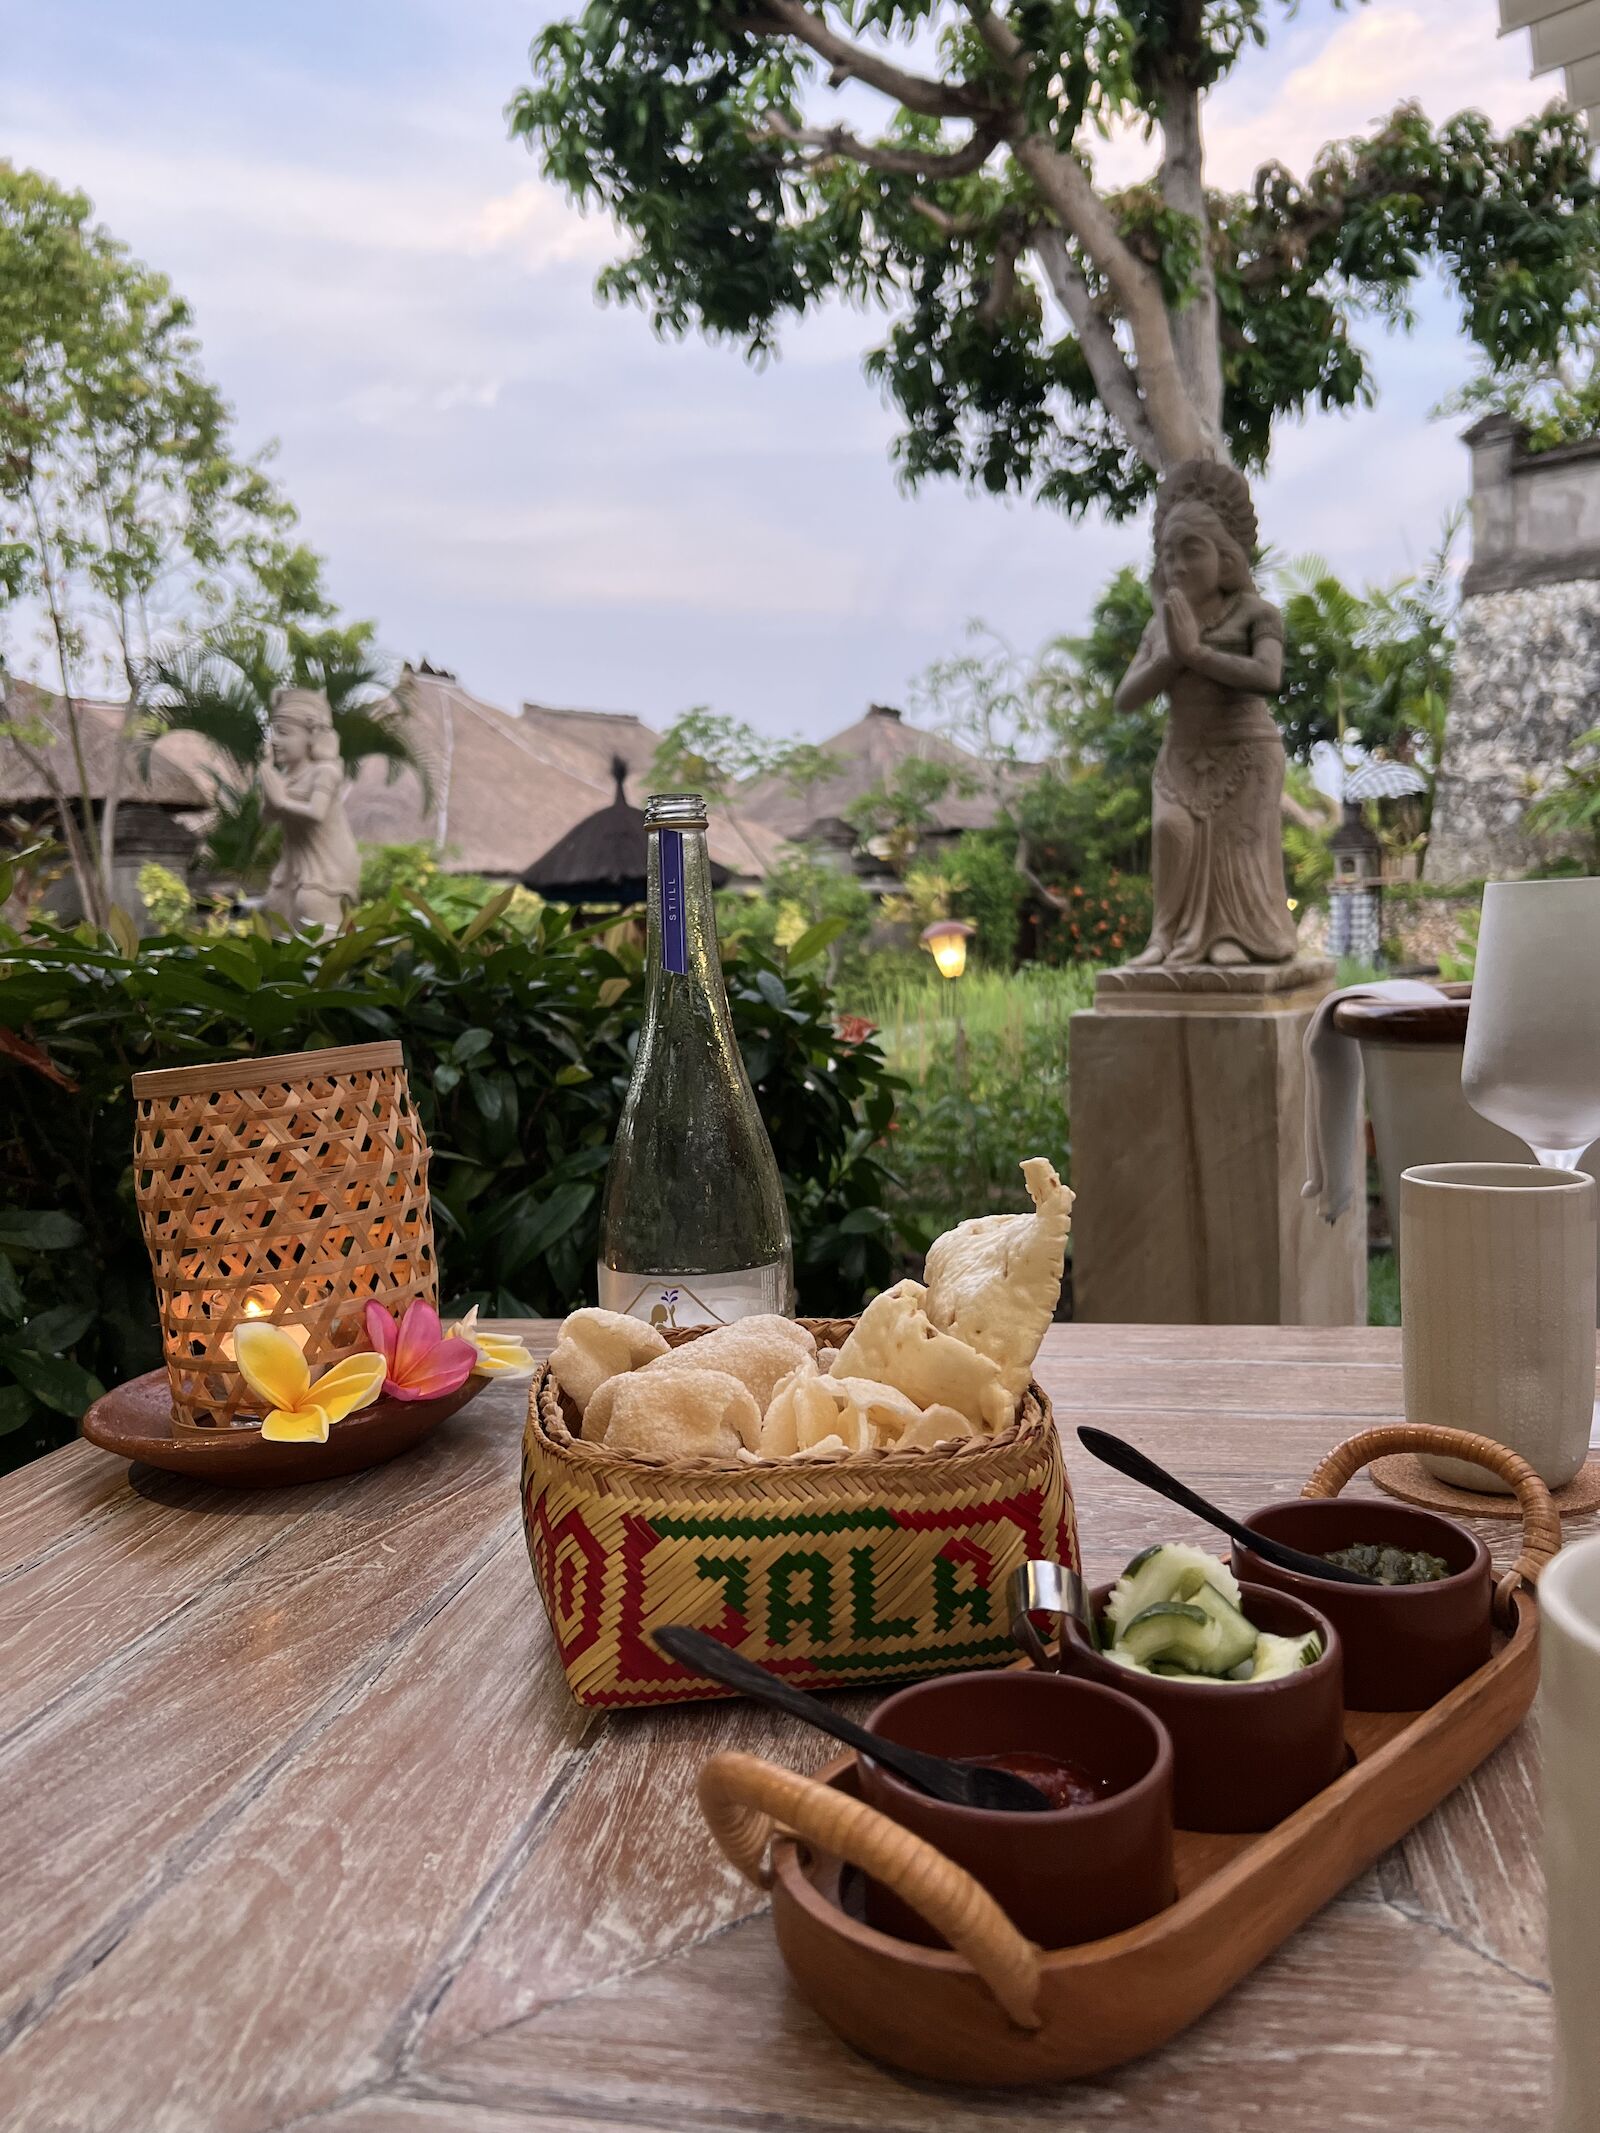 snacks on the table at four seasons bali